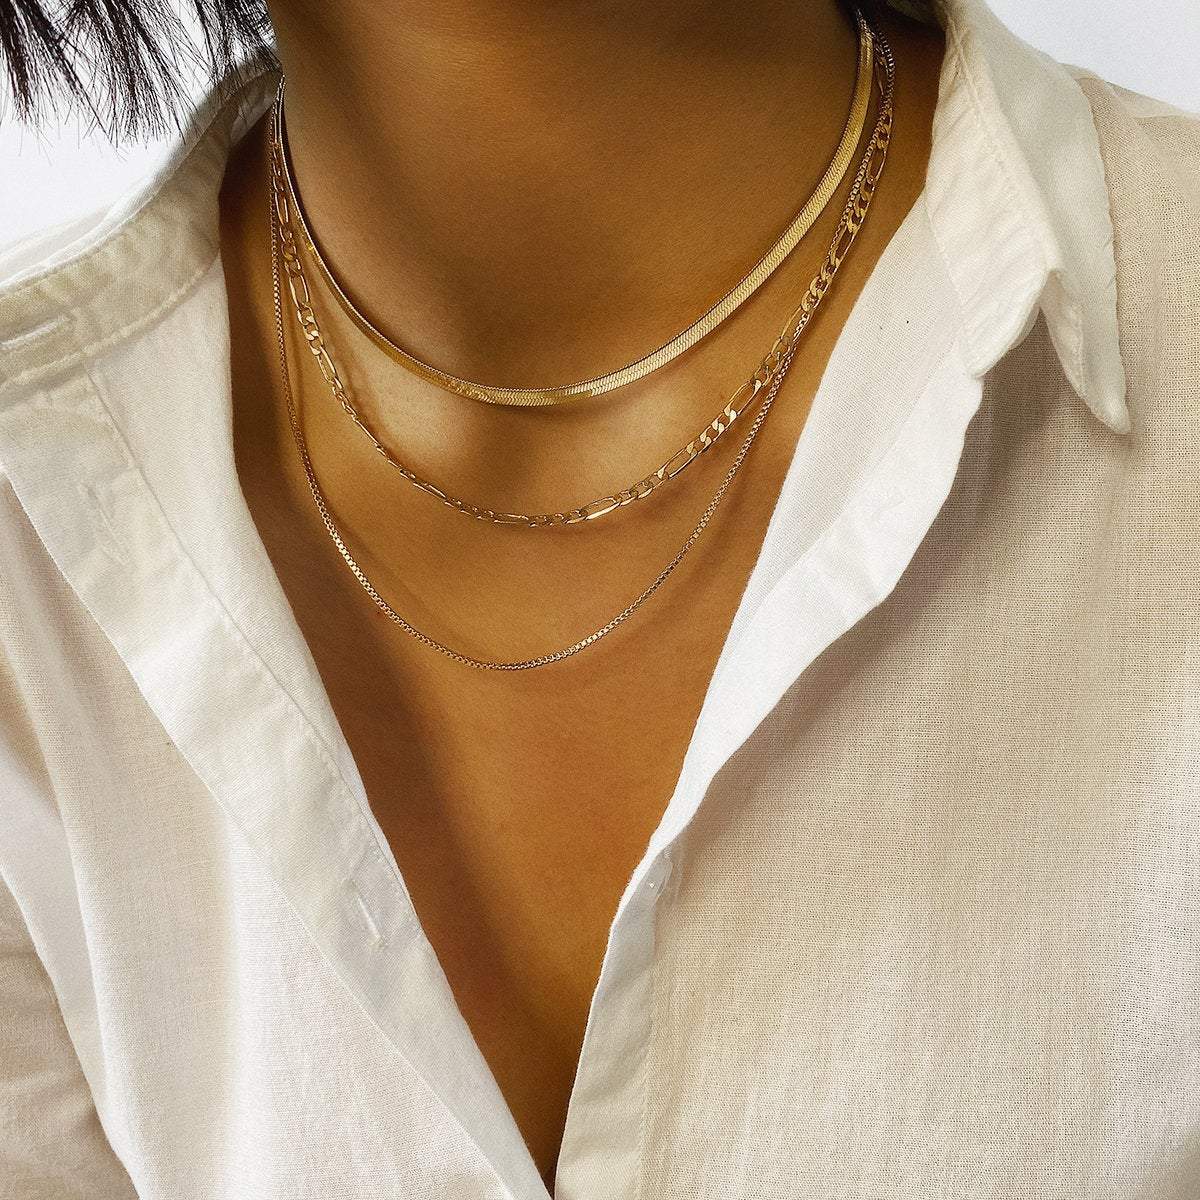 Dainty Gold Chain, Gold Layering Chain, Gold Chain Choker, Thin Chain  Necklace, Delicate Gold Chain, Simple Chain Necklace, Gold Link Chain 